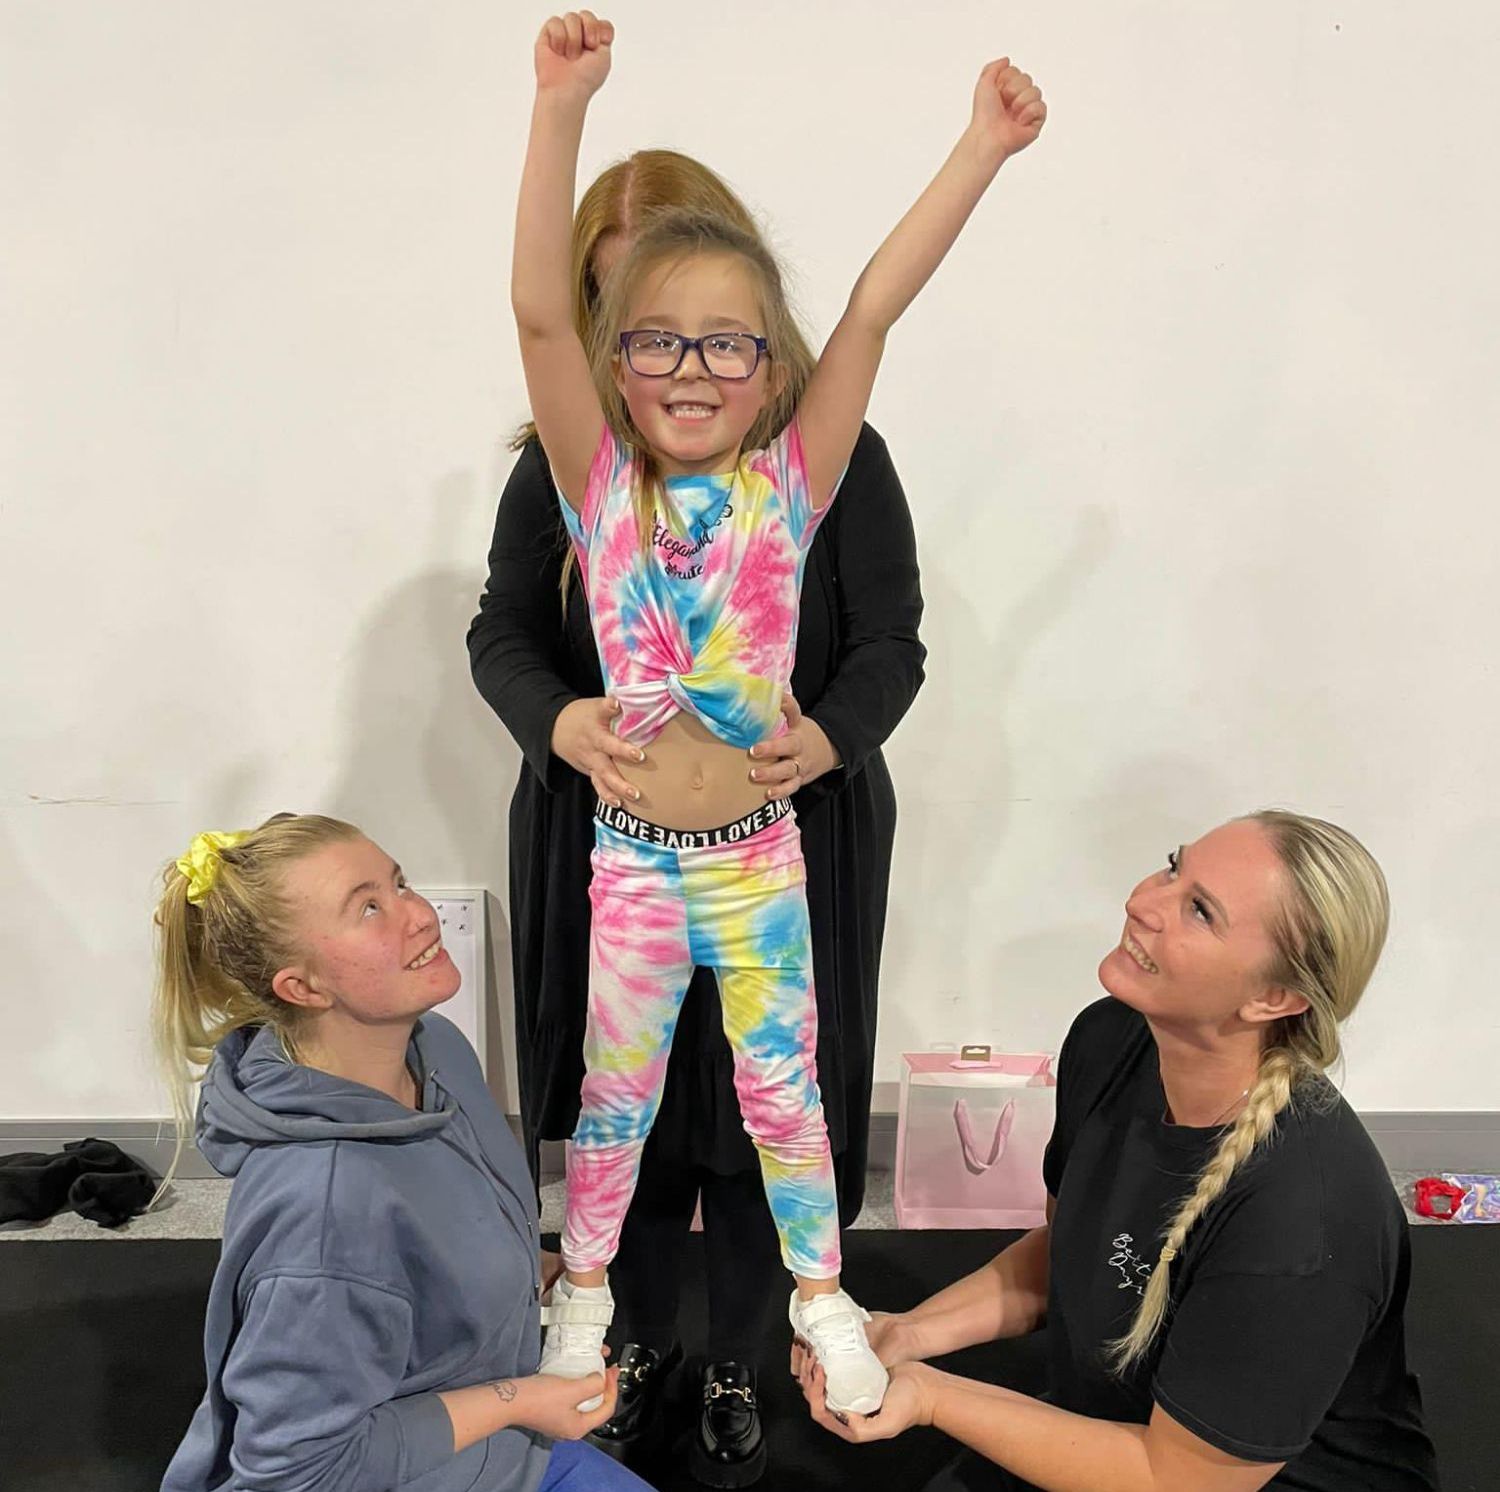 A girl being supported in a cheer position by  her family or carers